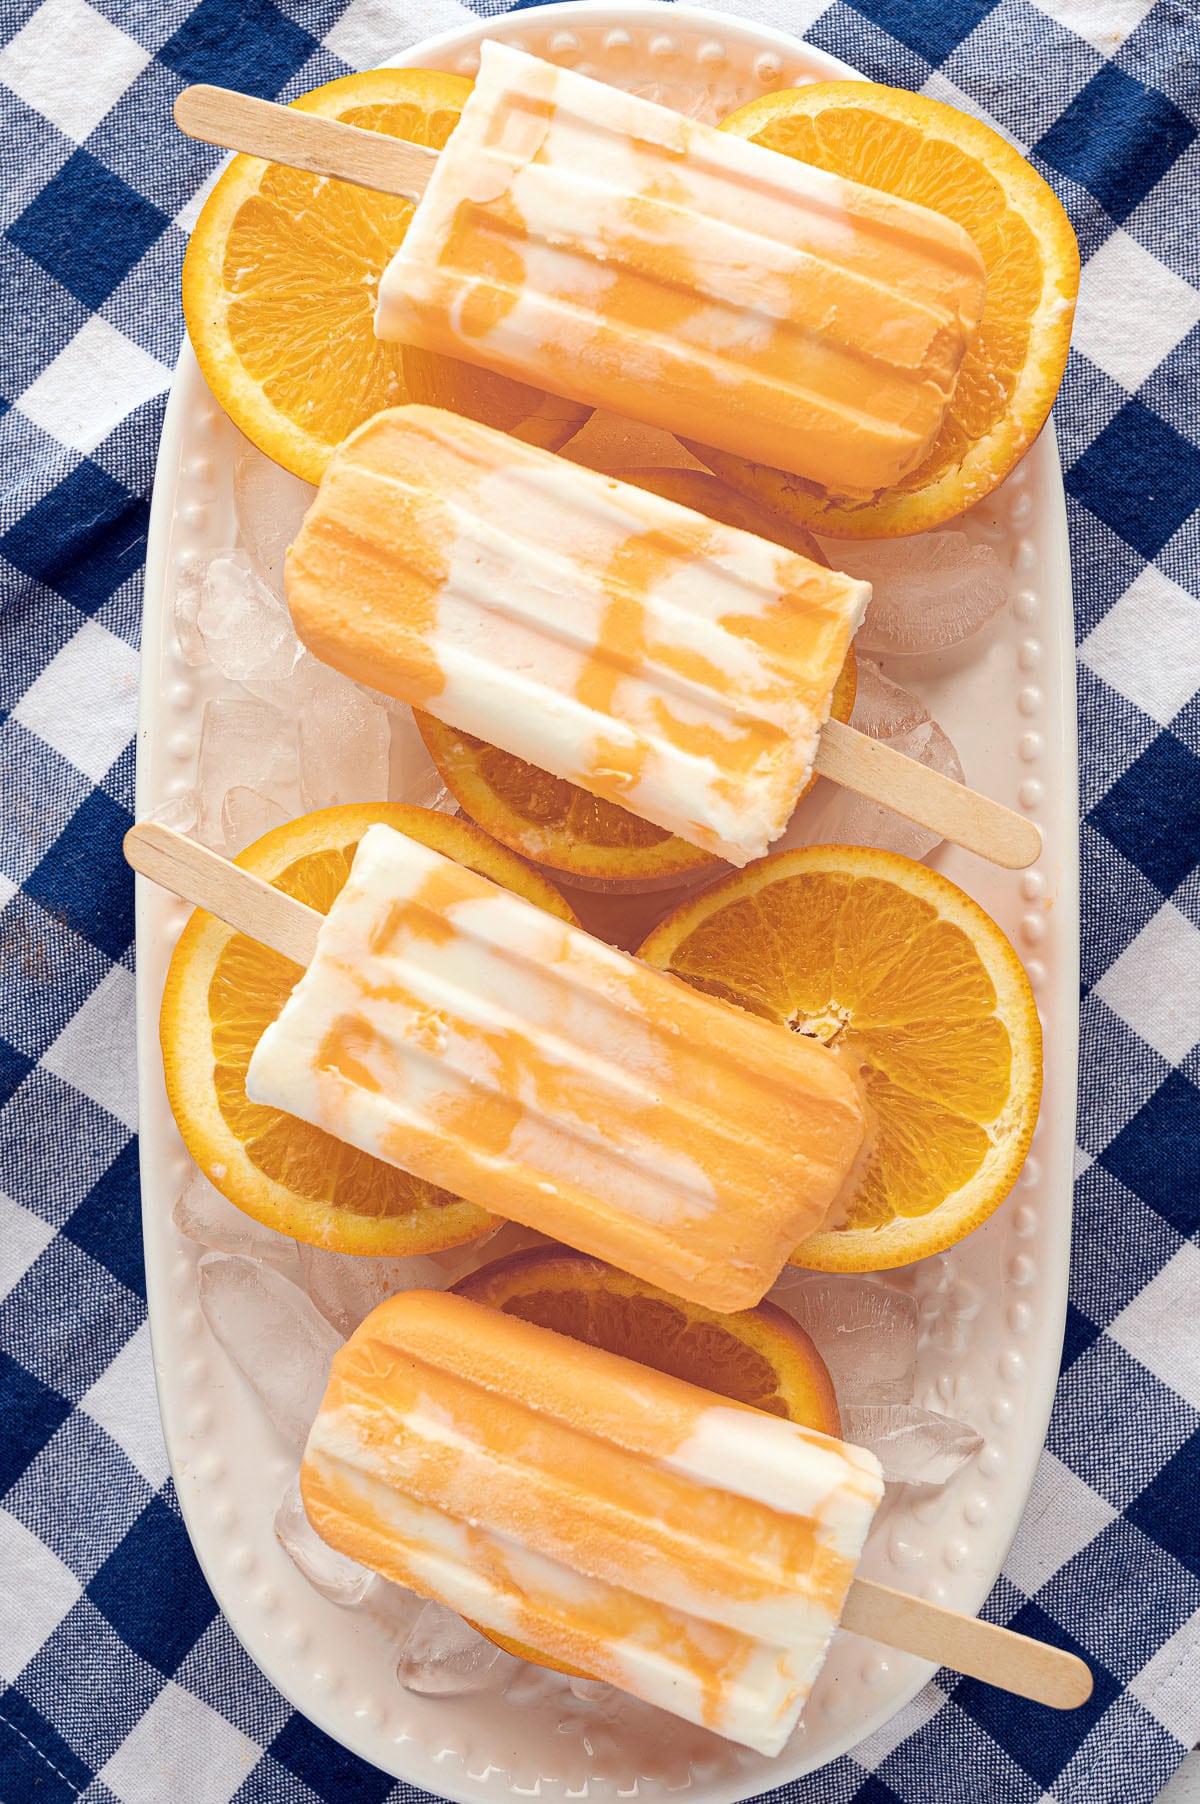 Orange and white marbled creamsicle popsicles resting on a white platter on top of a blue gingham table cloth